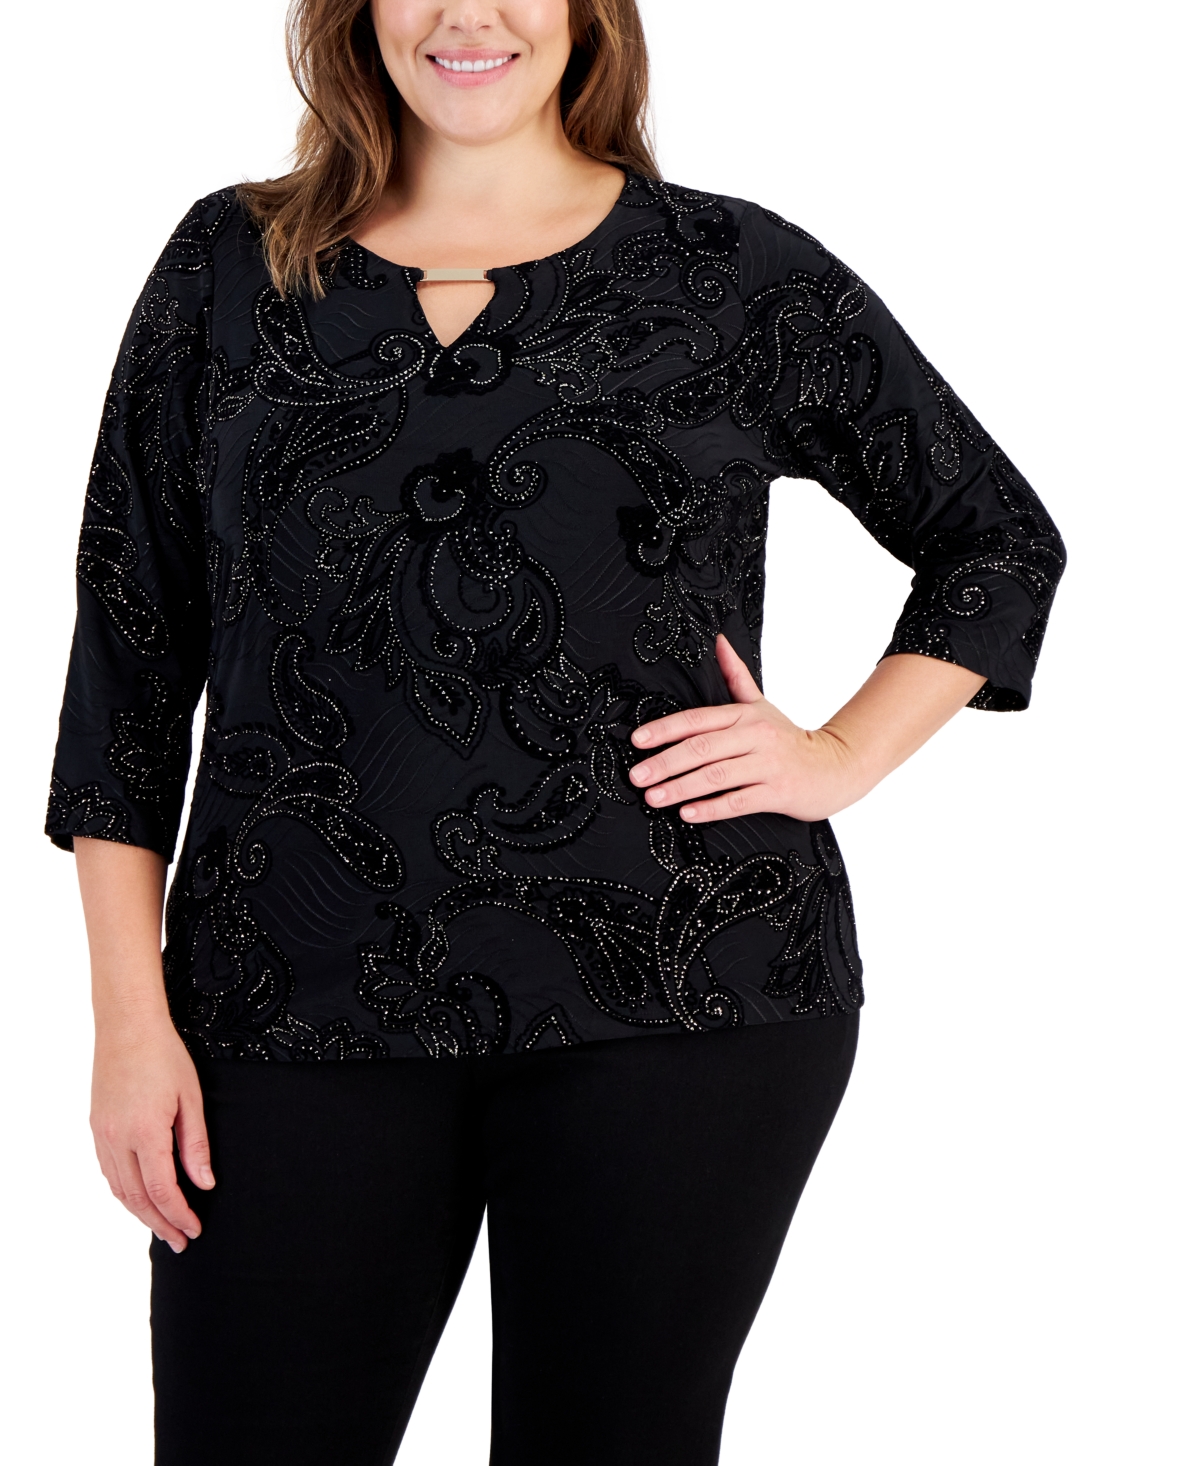 Jm Collection Plus Size Paisley Glitter Keyhole Top, Created for Macy's